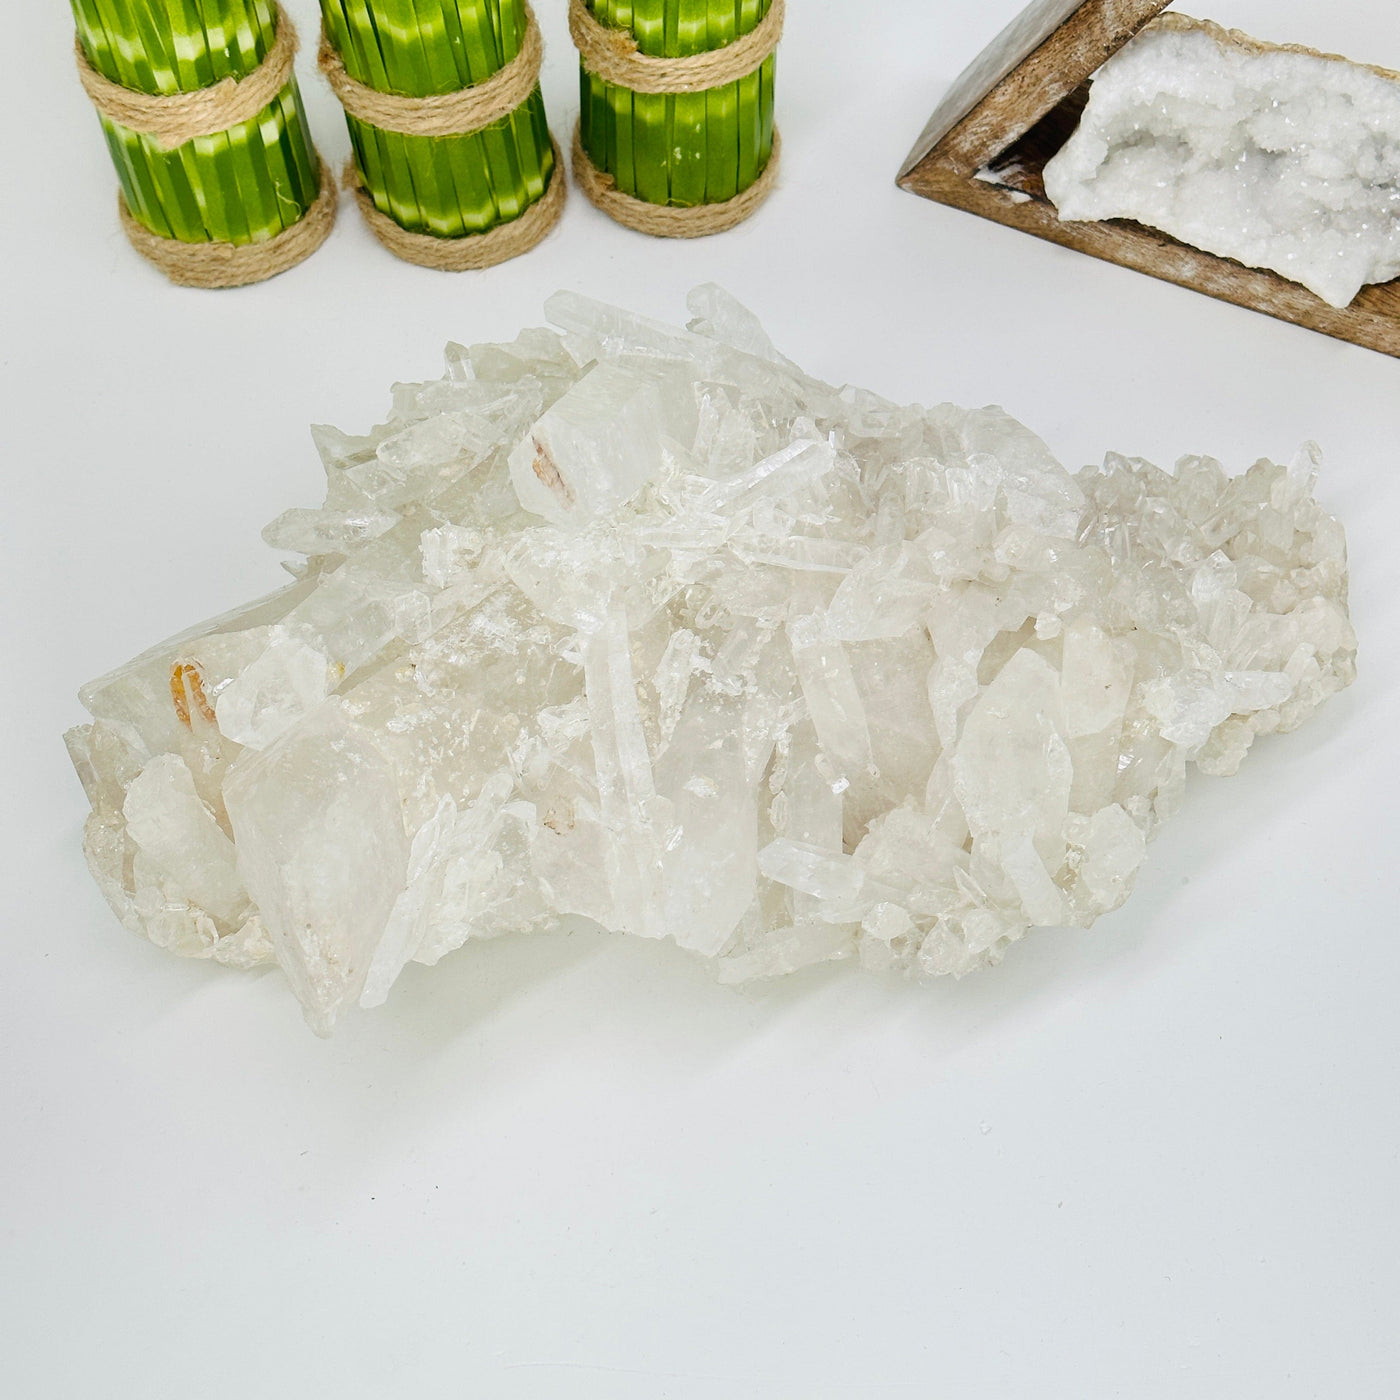 crystal quartz freeform with decorations in the background